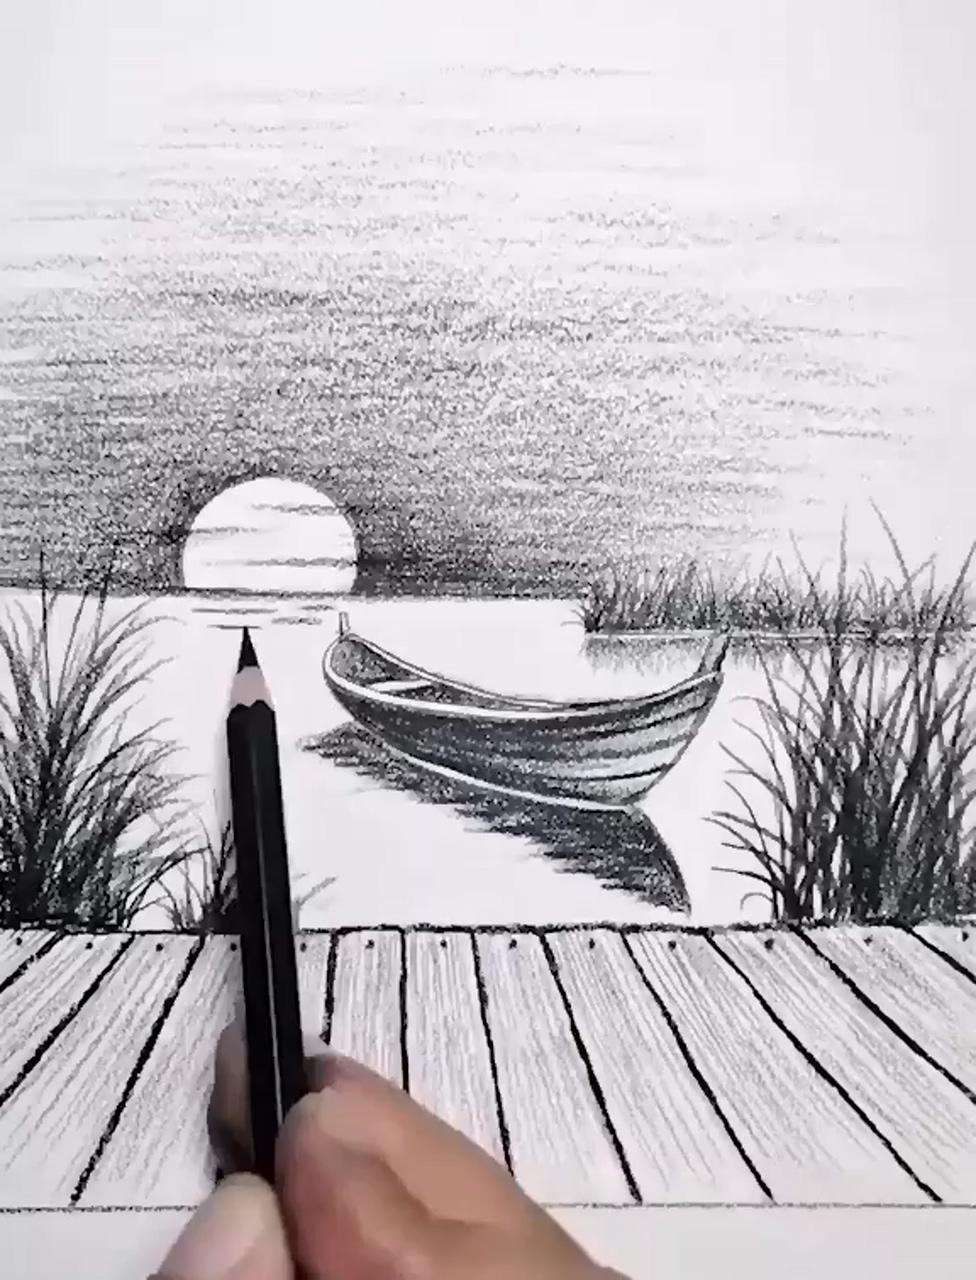 Pencil drawings of nature | pencil sketches easy